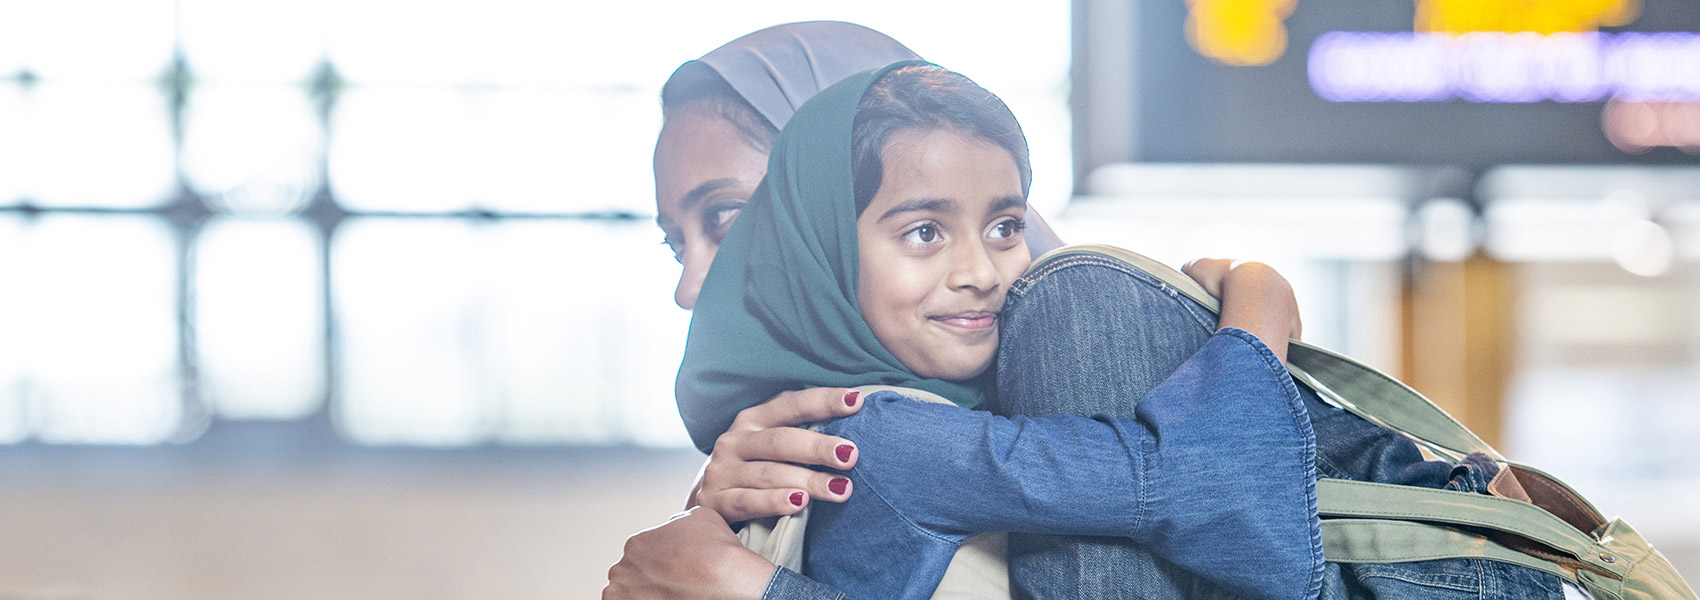 7 ways to welcome refugees into your community Banner Image